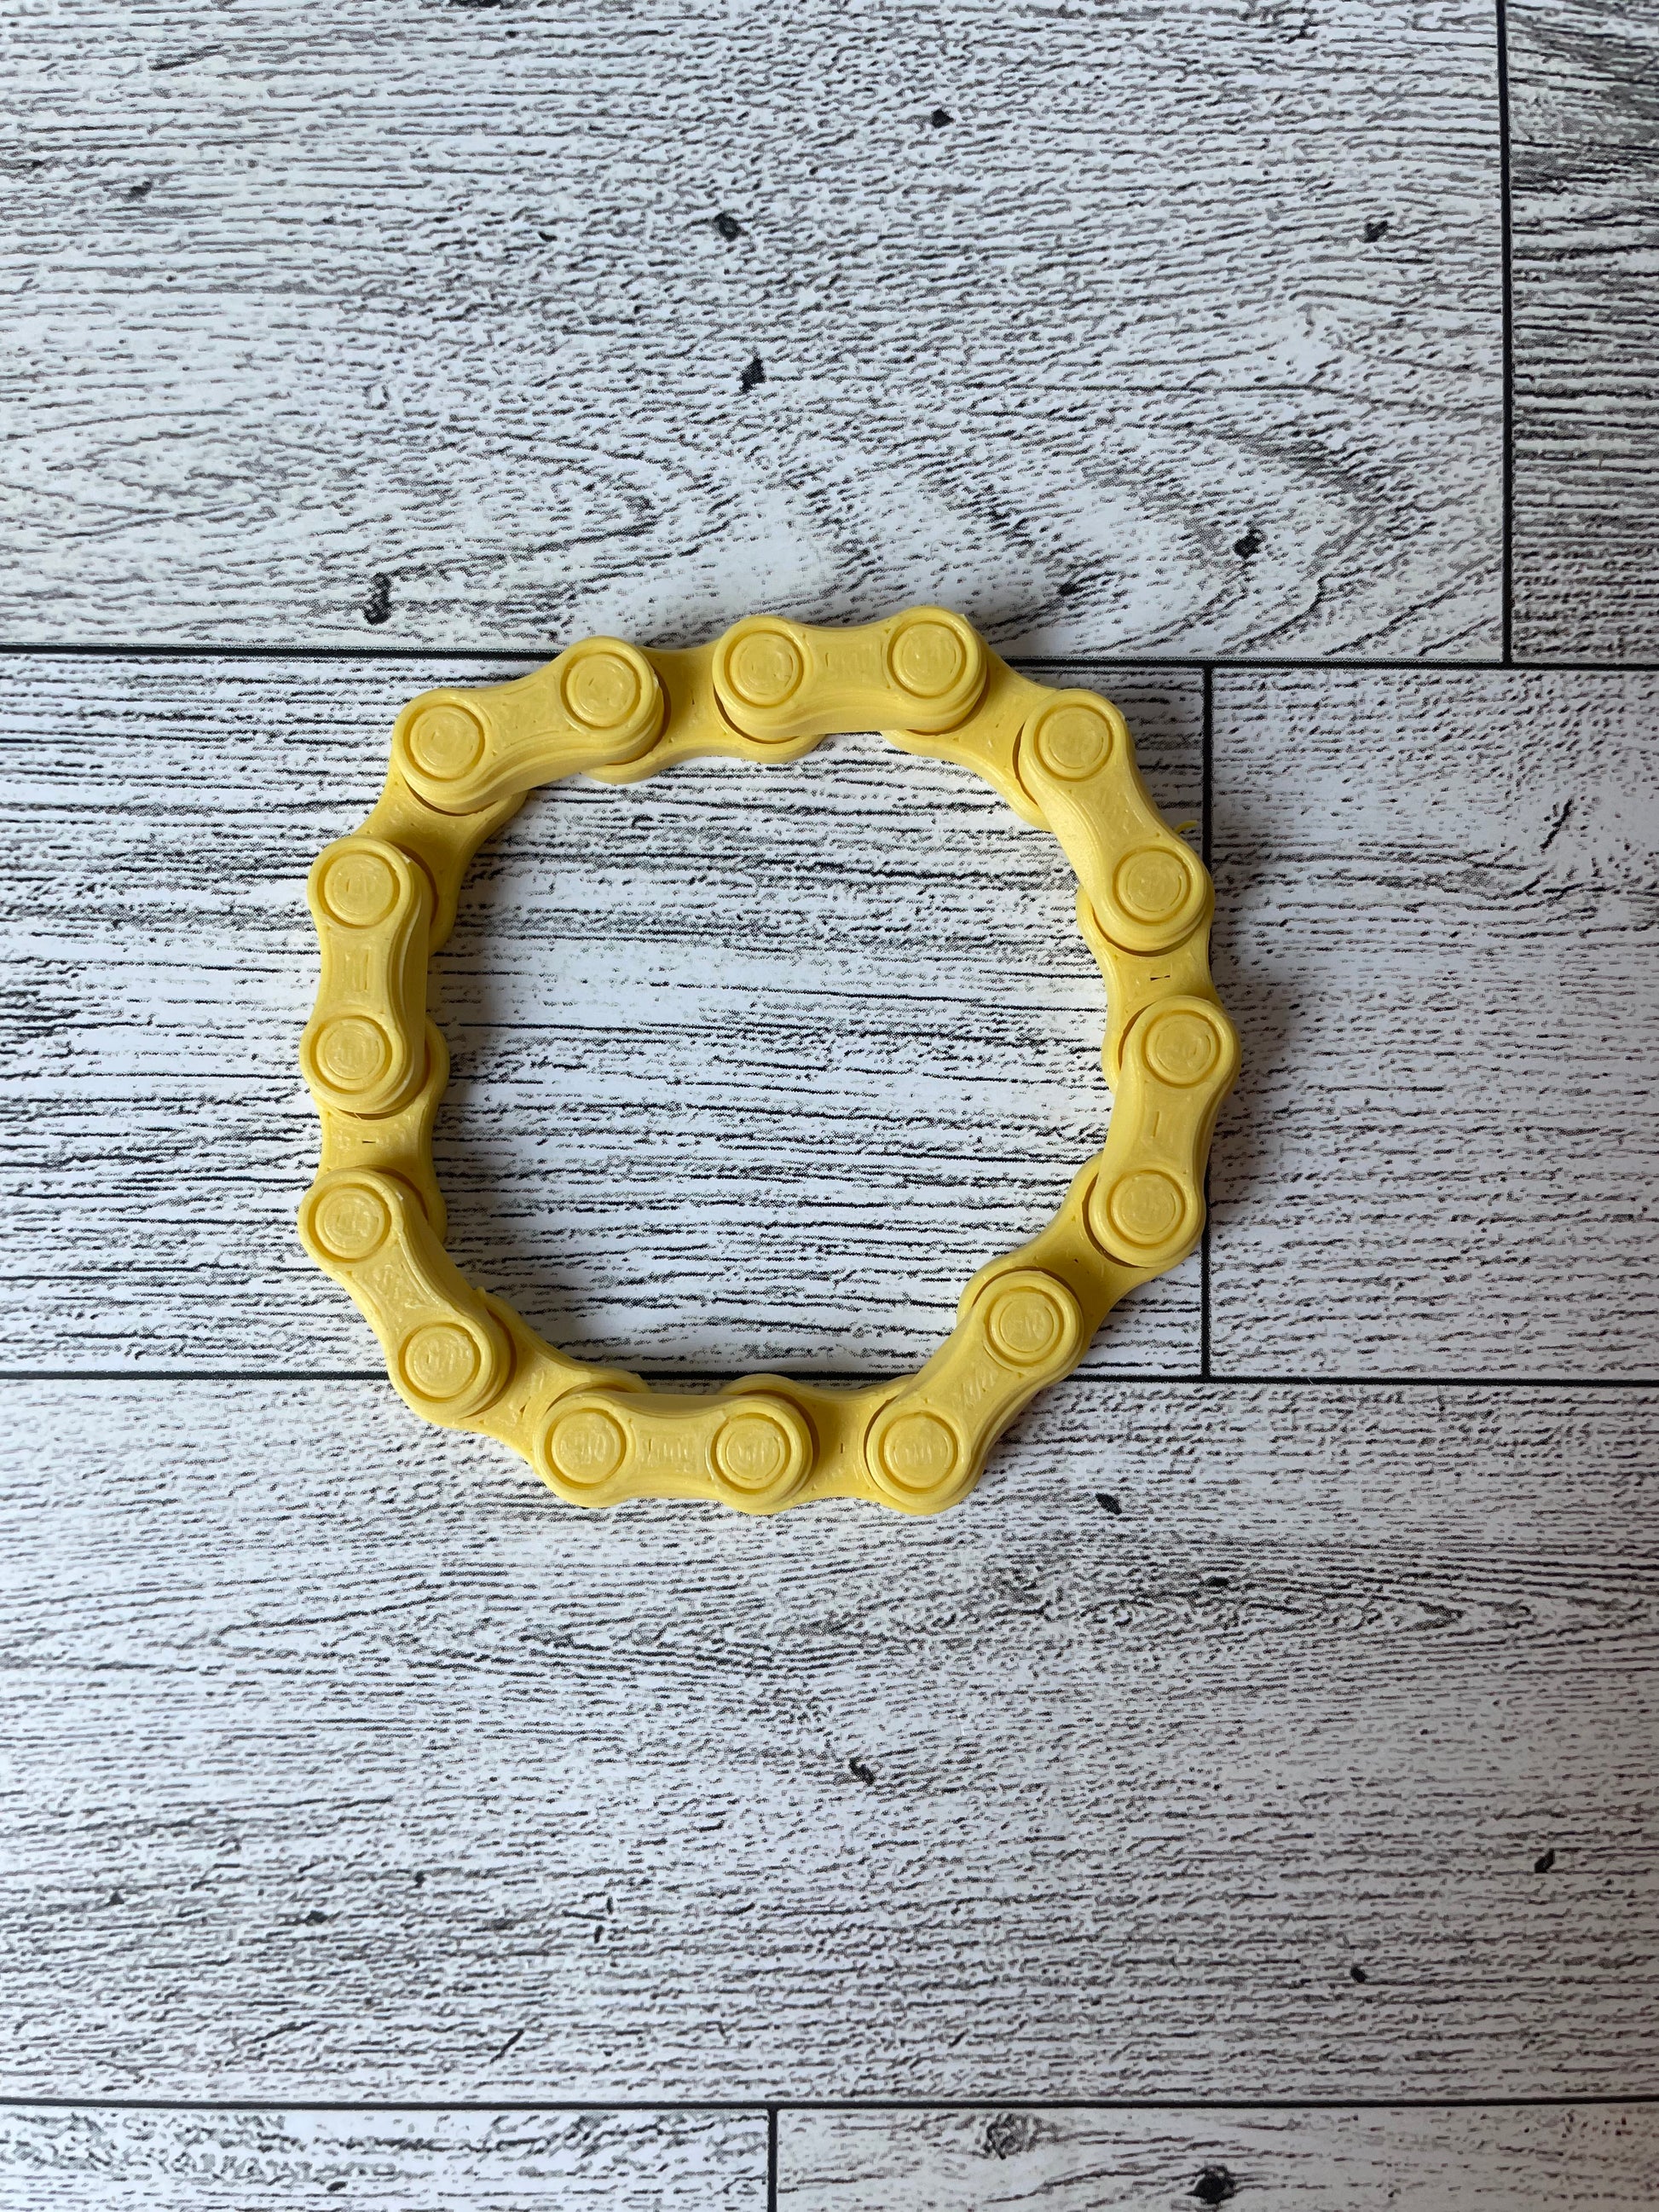 A yellow chain link on a wood backdrop. The chain is arranged in a circle shape and there are eight links.